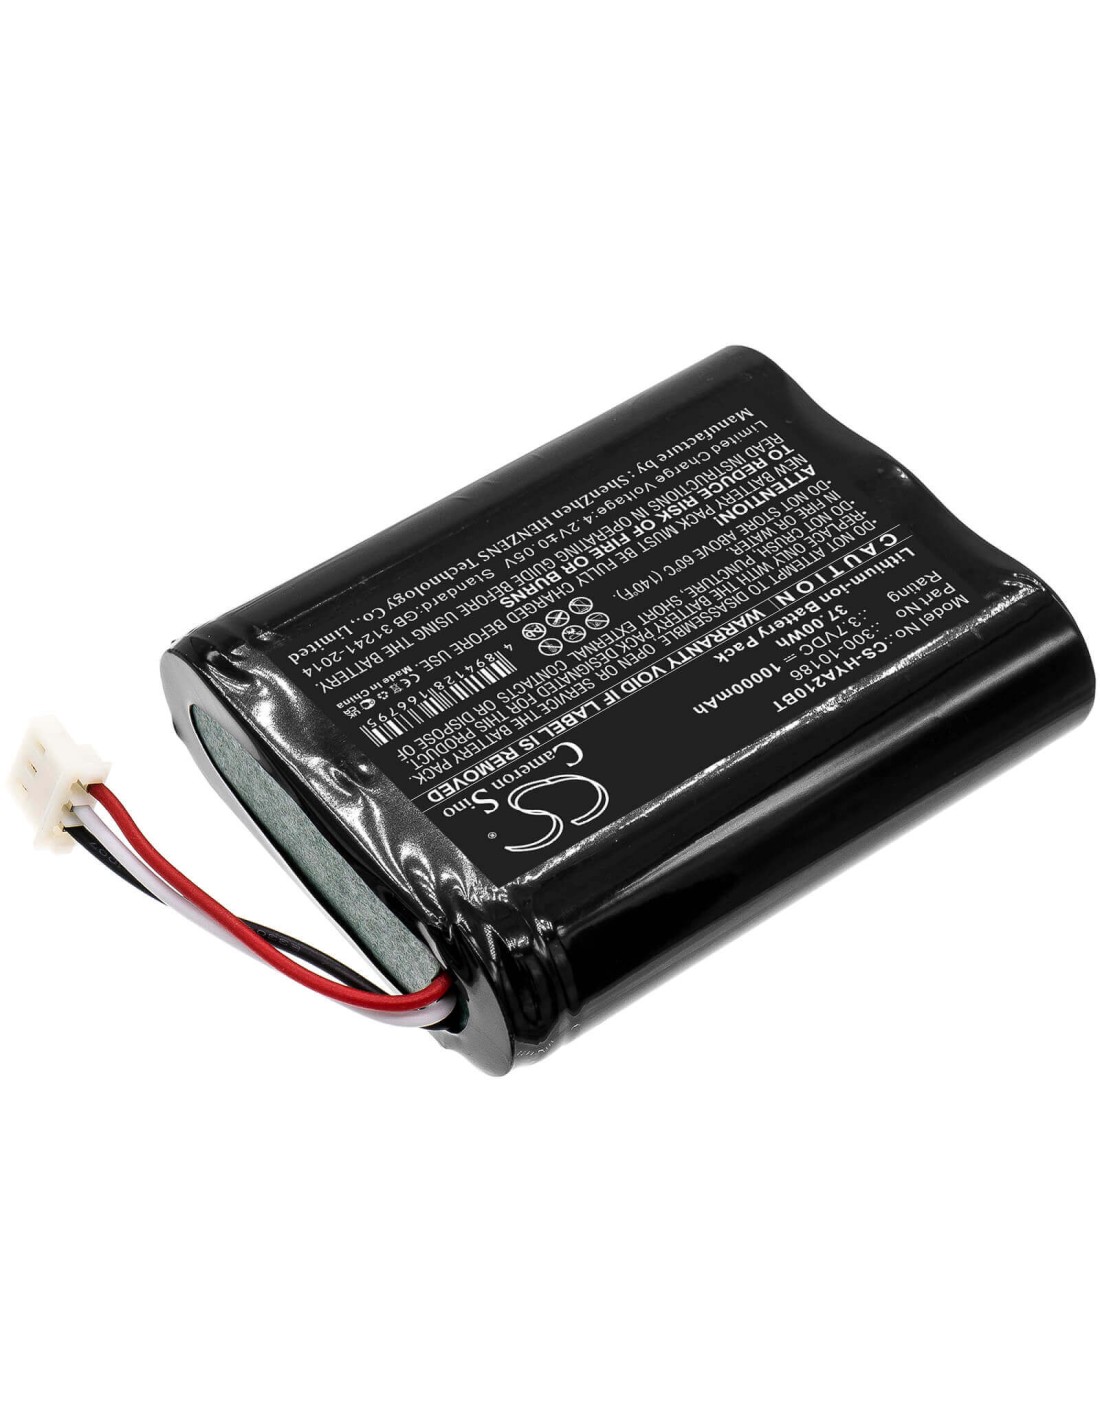 Battery for Adt, Command Smart Security Panel, Honeywell, Ai05-2 3.7V, 10000mAh - 37.00Wh